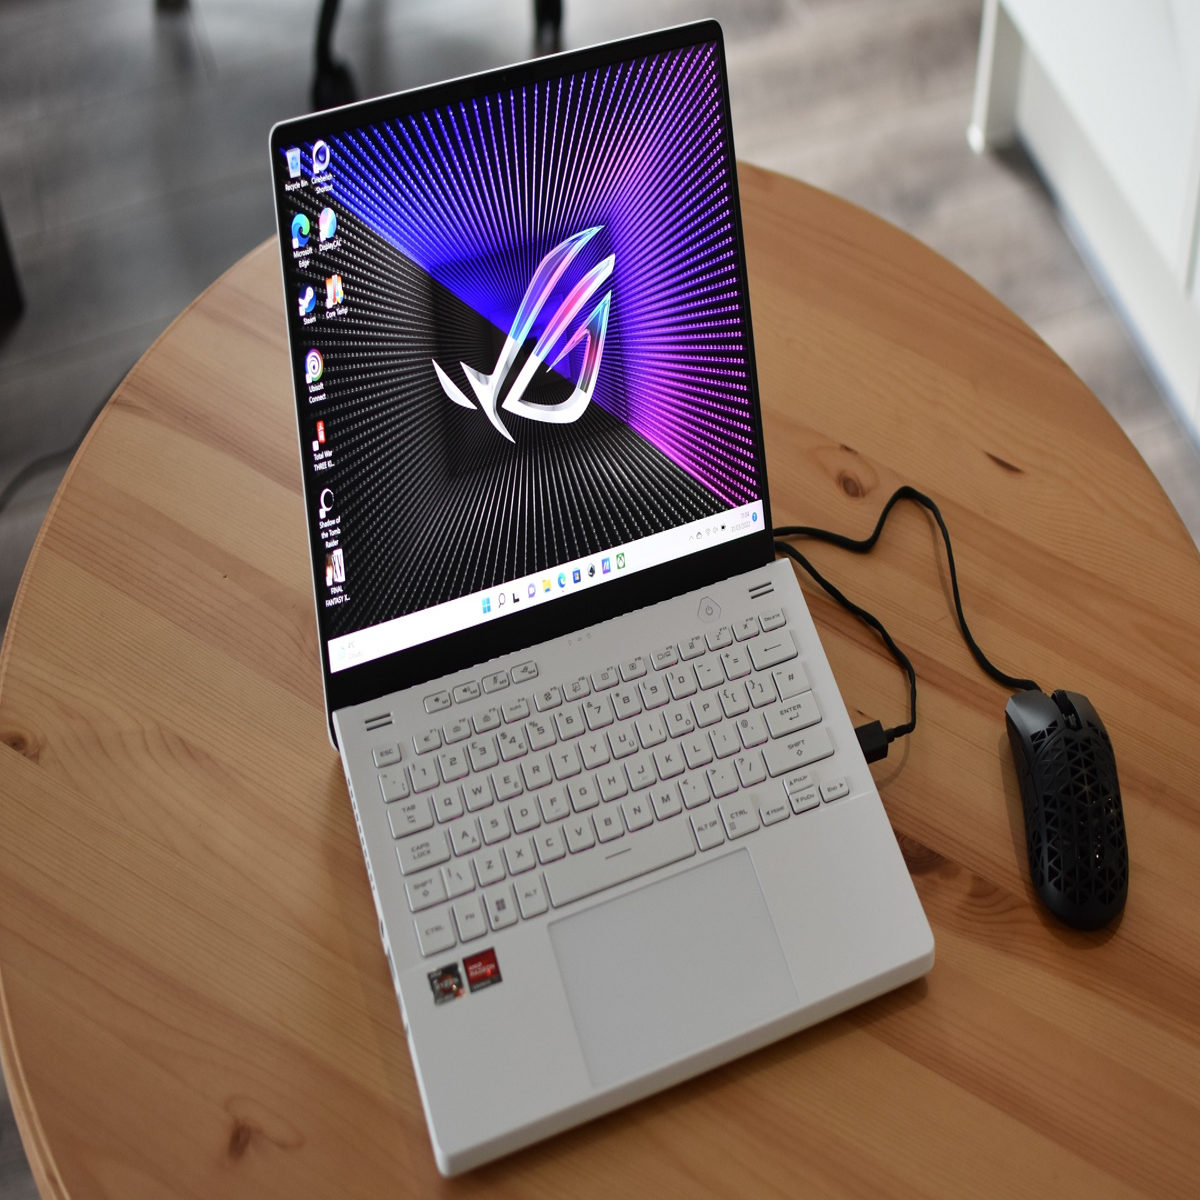 Asus ROG Zephyrus G14 Review: Fast, Affordable, and Too Hot